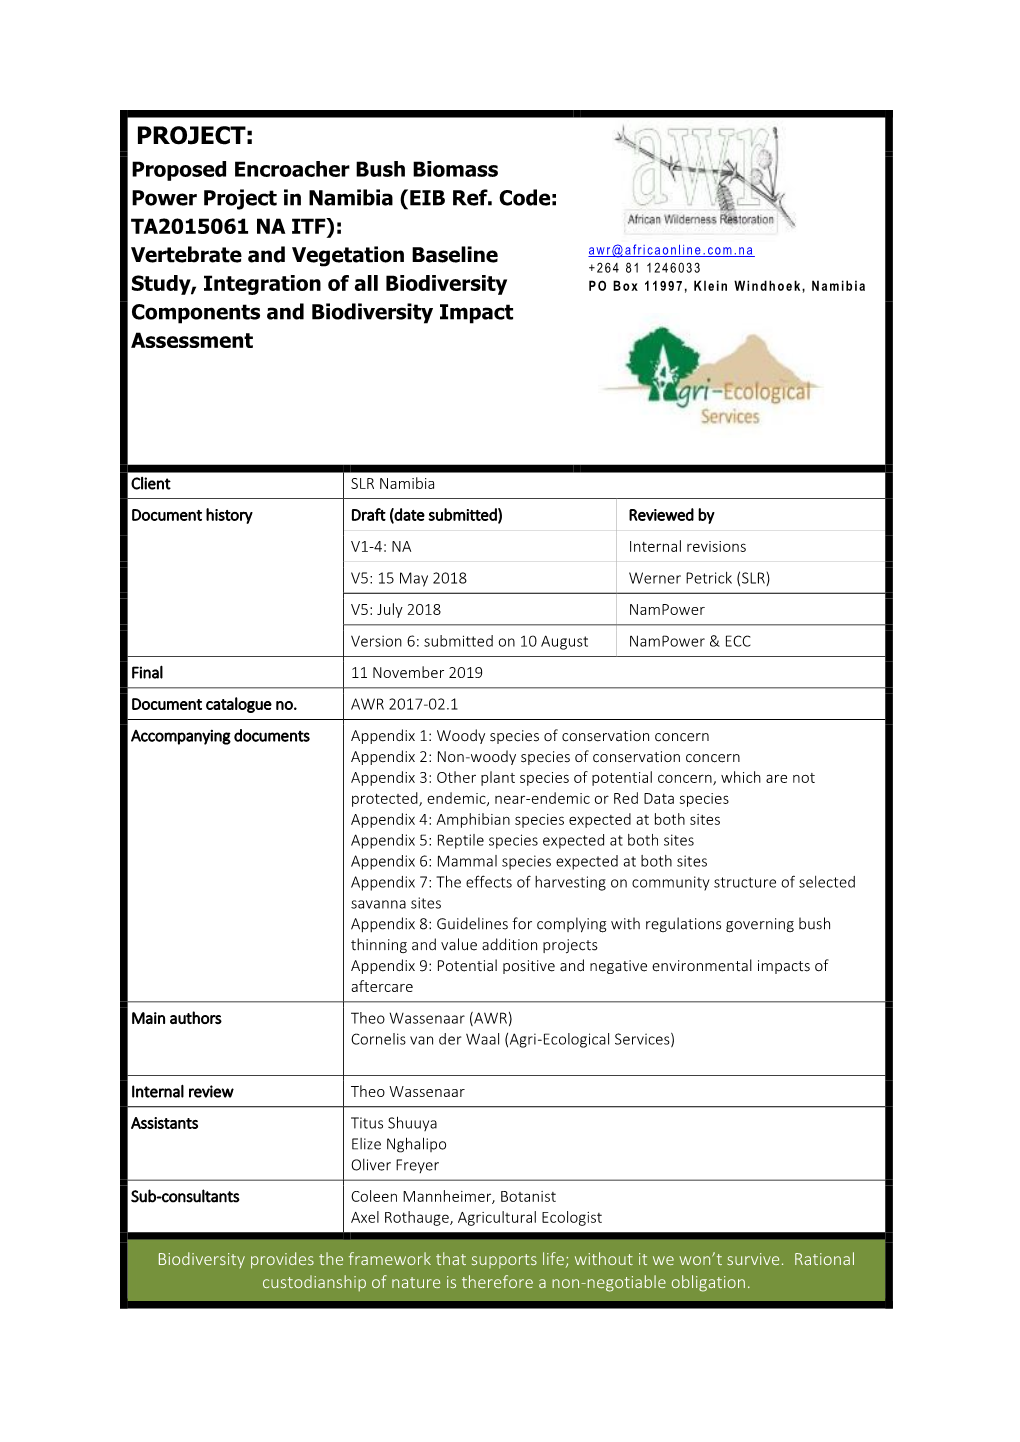 PROJECT: Proposed Encroacher Bush Biomass Power Project in Namibia (EIB Ref